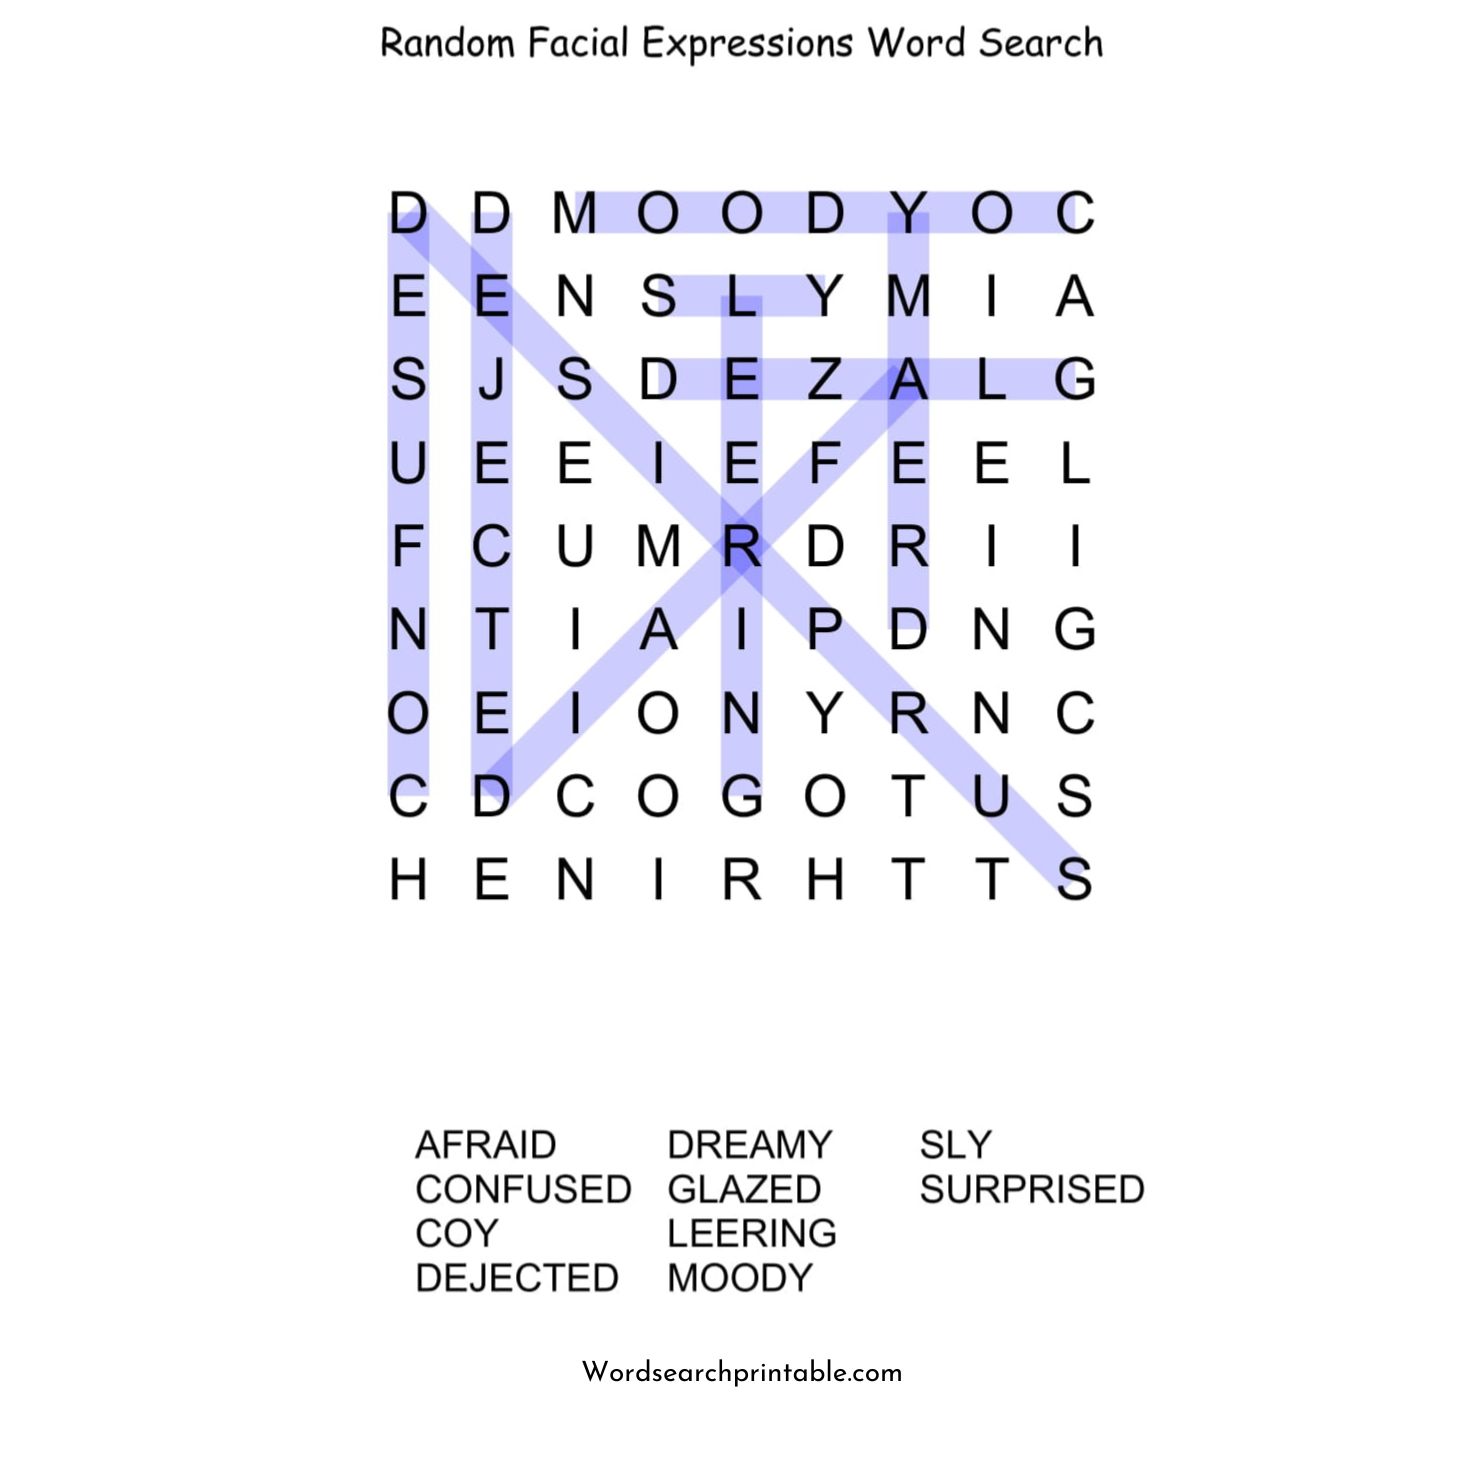 random facial expressions word search puzzle solution